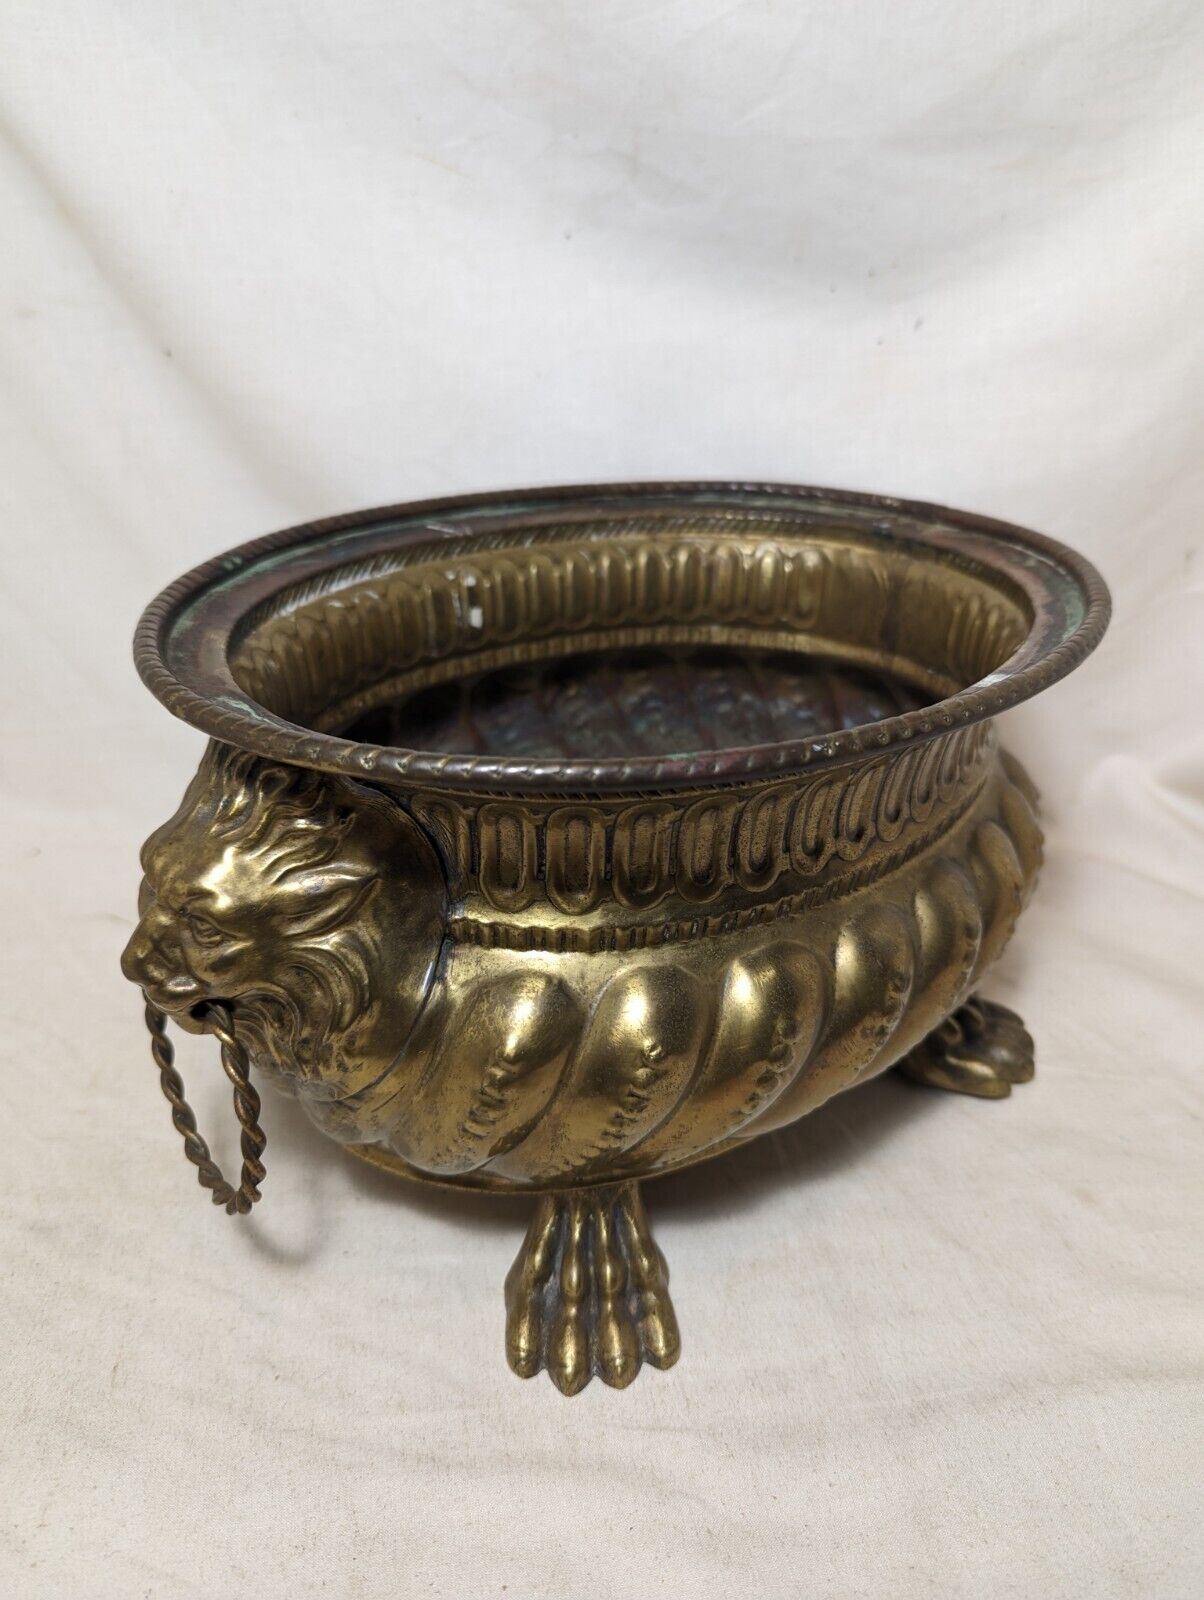 Antique Brass Lion Head Jardiniere Hand Hammered Late 19th Century French style